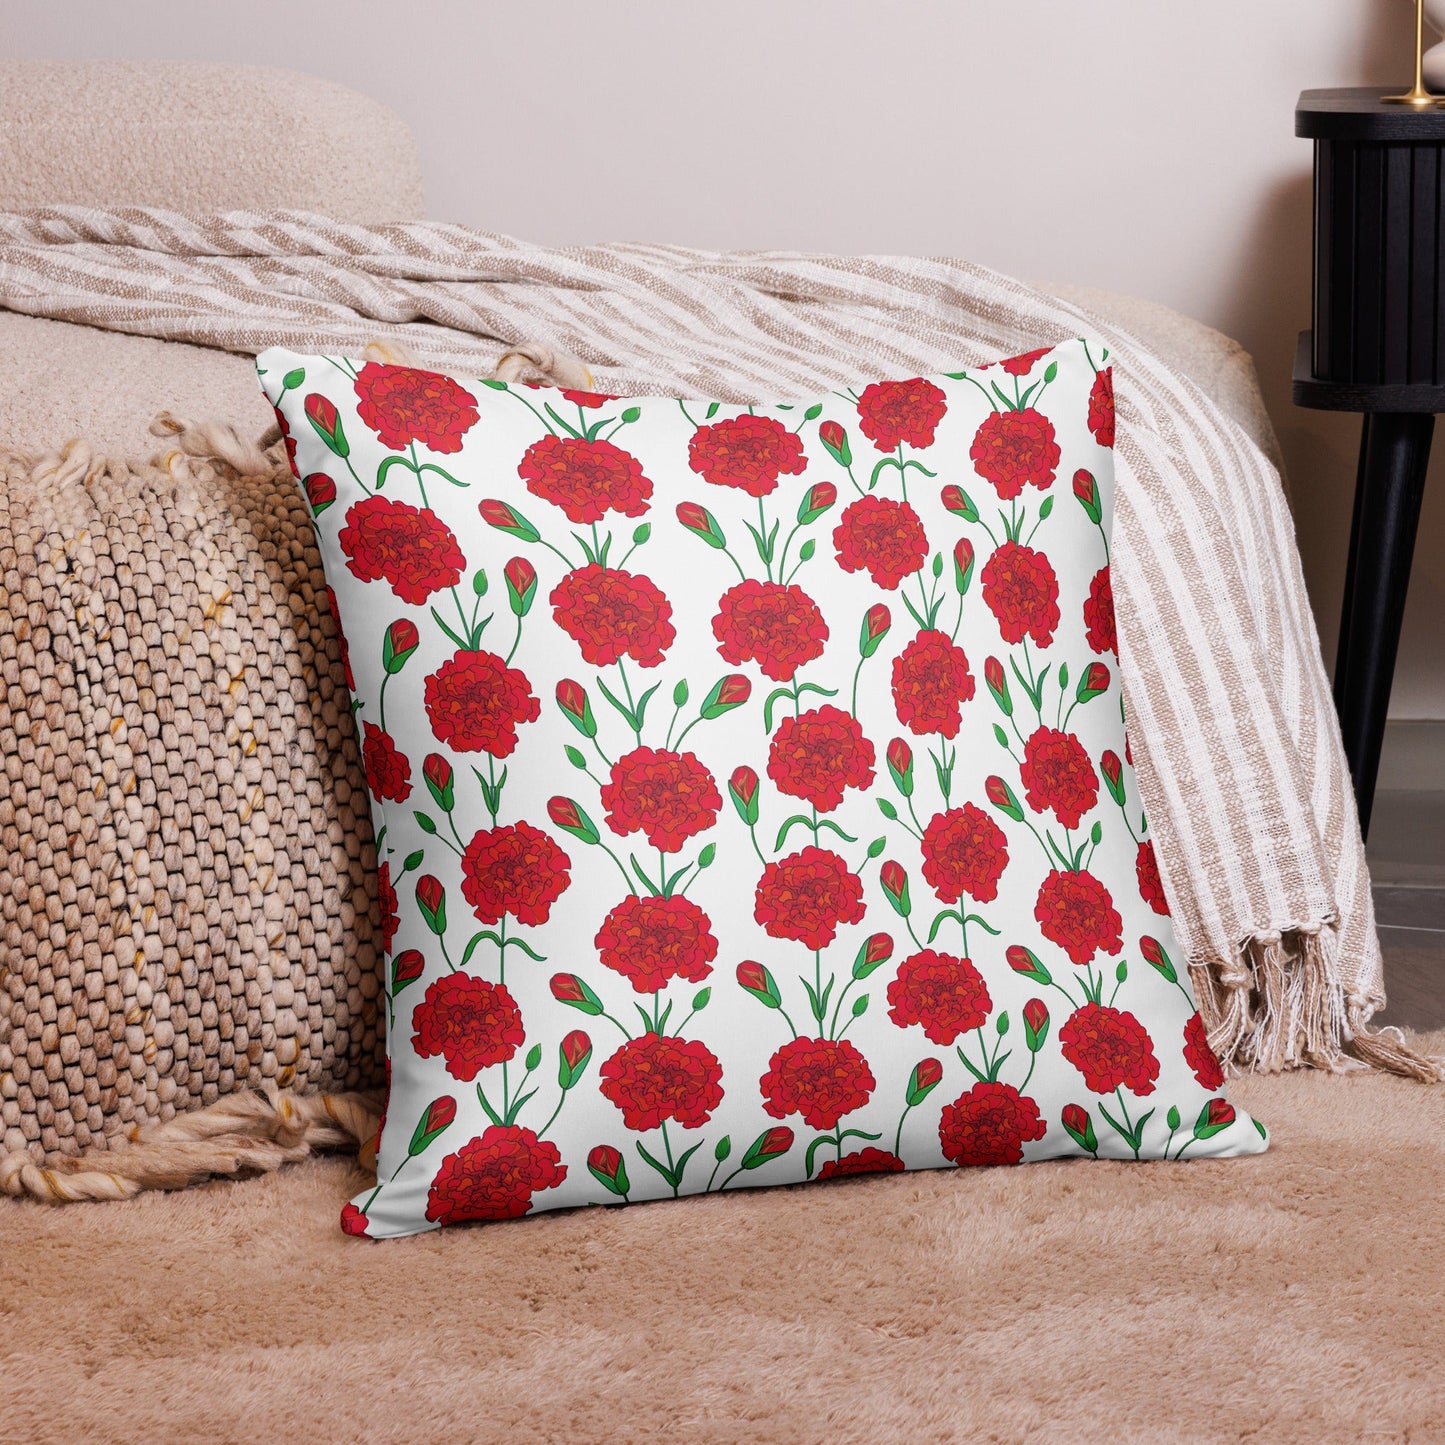 Luxurious Roses Pillow - Comfortable Floral Cushion for Home Decor